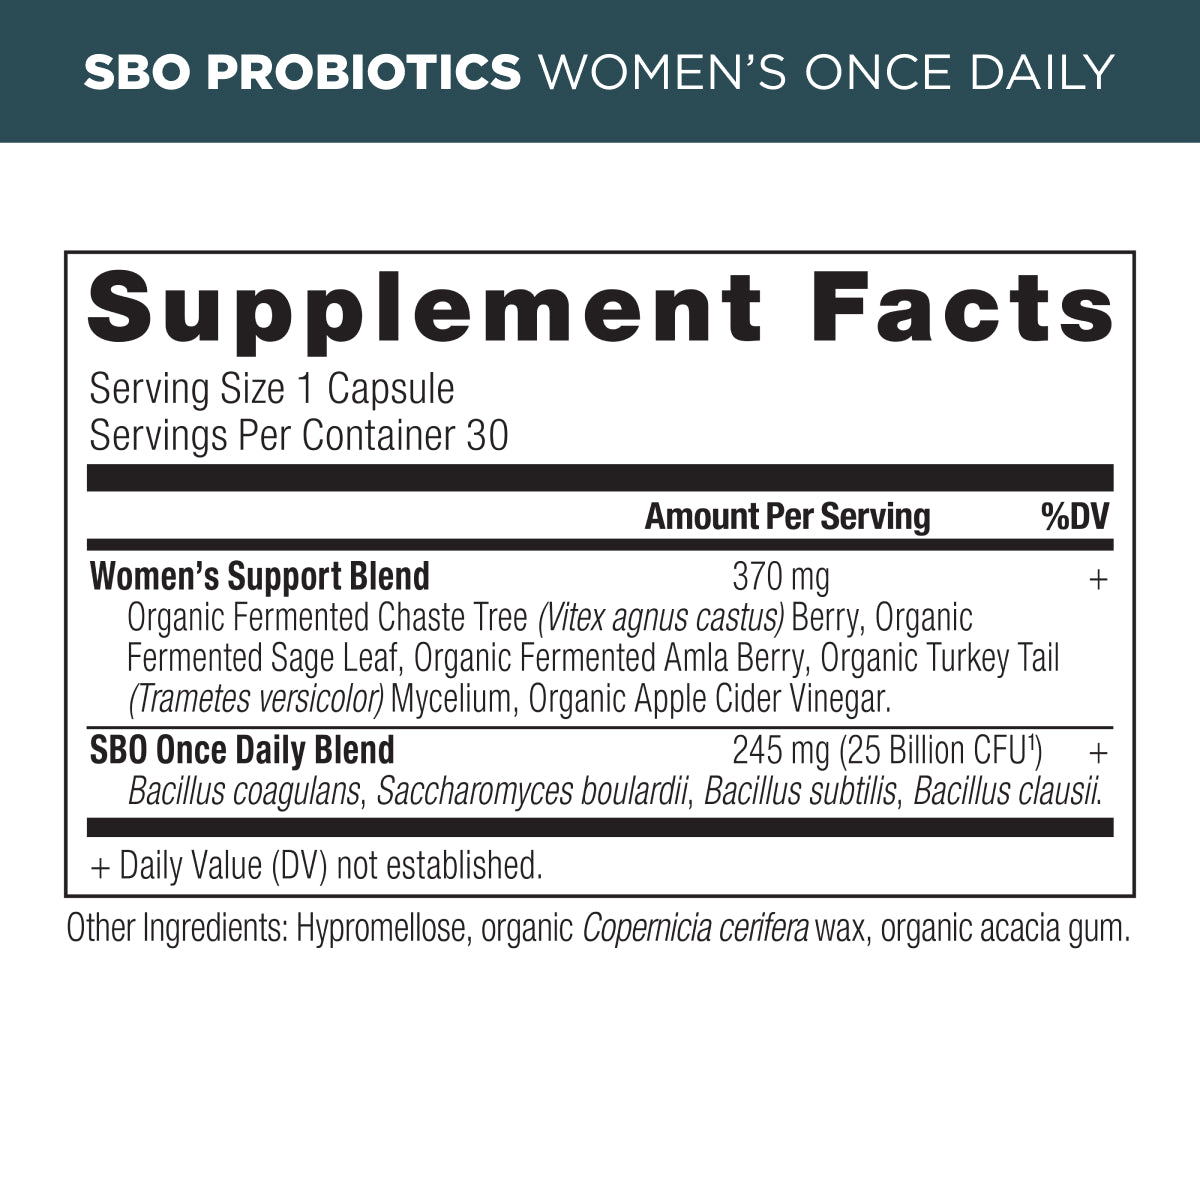 SBO Probiotics Women's Once Daily supplement label